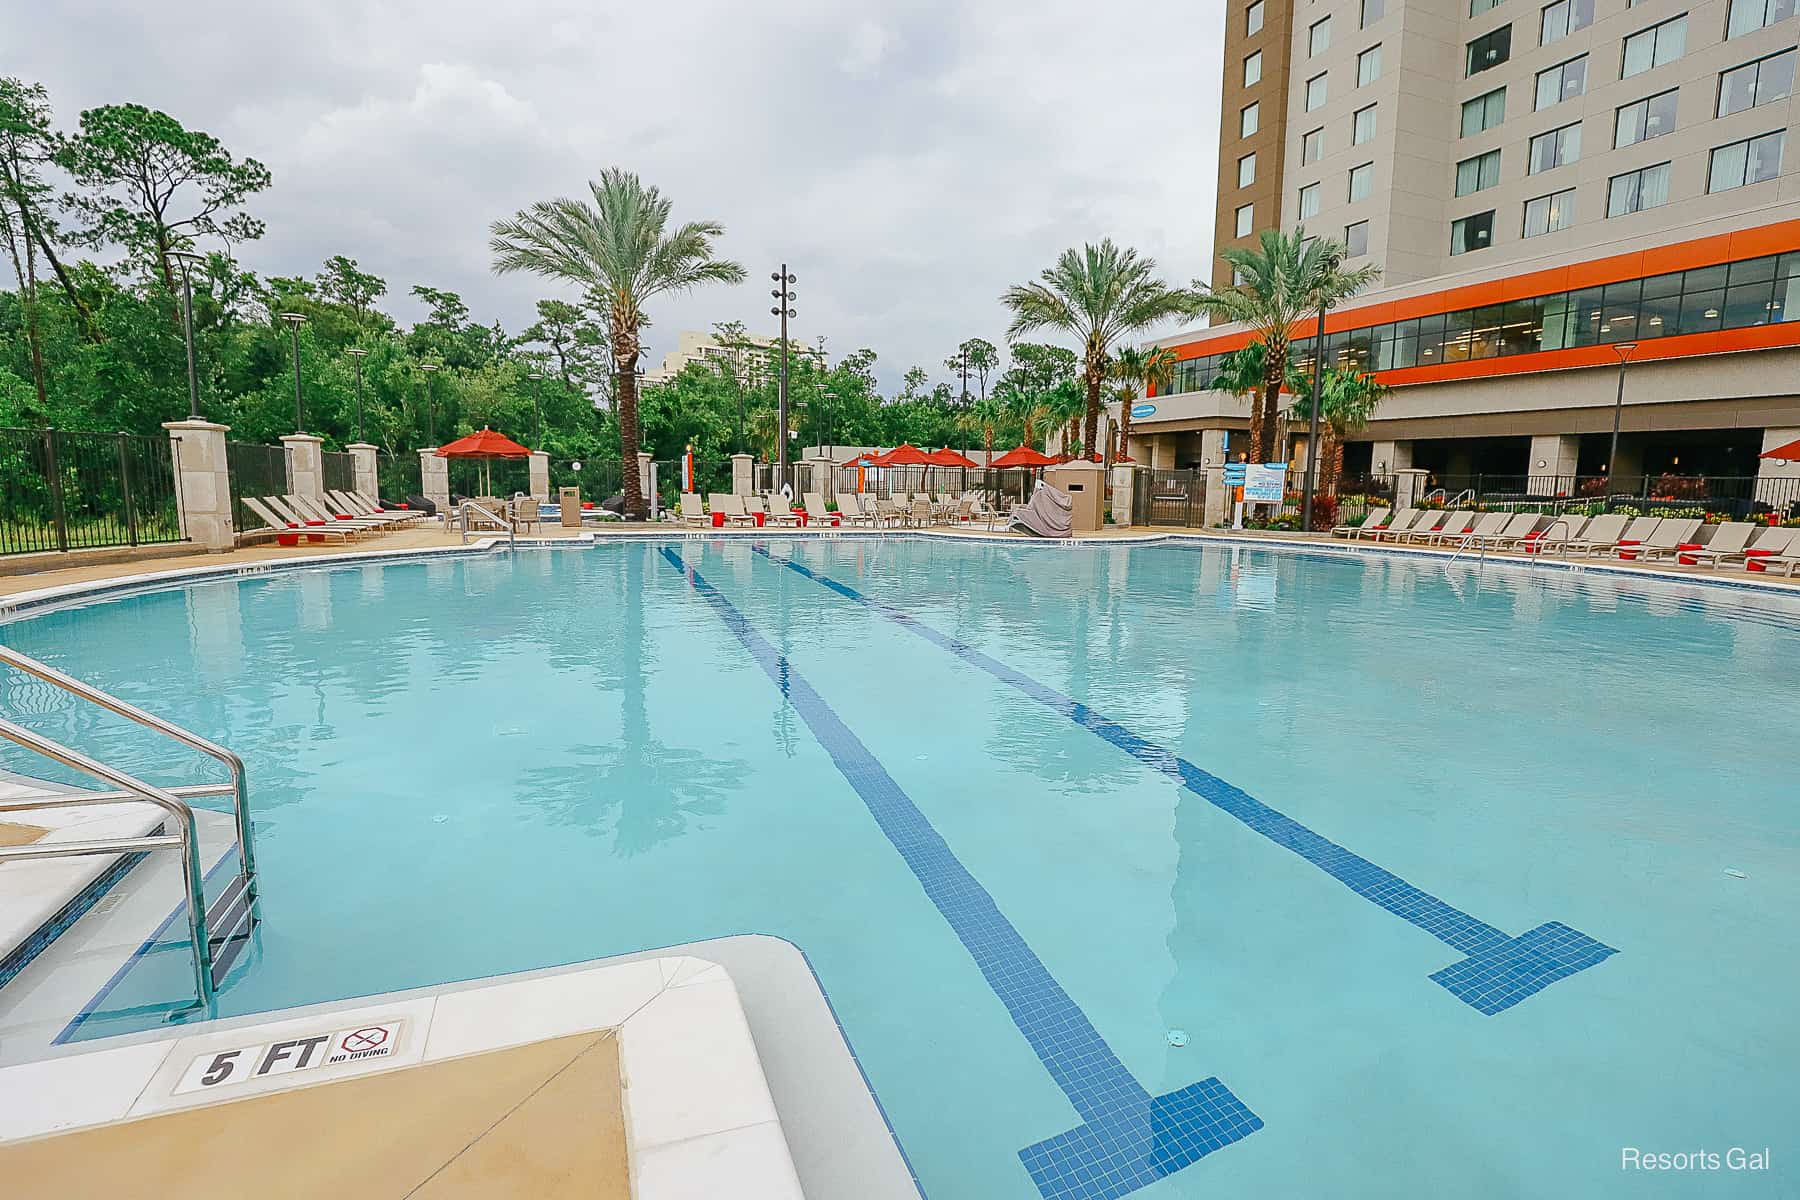 Shows the length of the pool at the Drury Plaza Hotel at Disney Springs. 